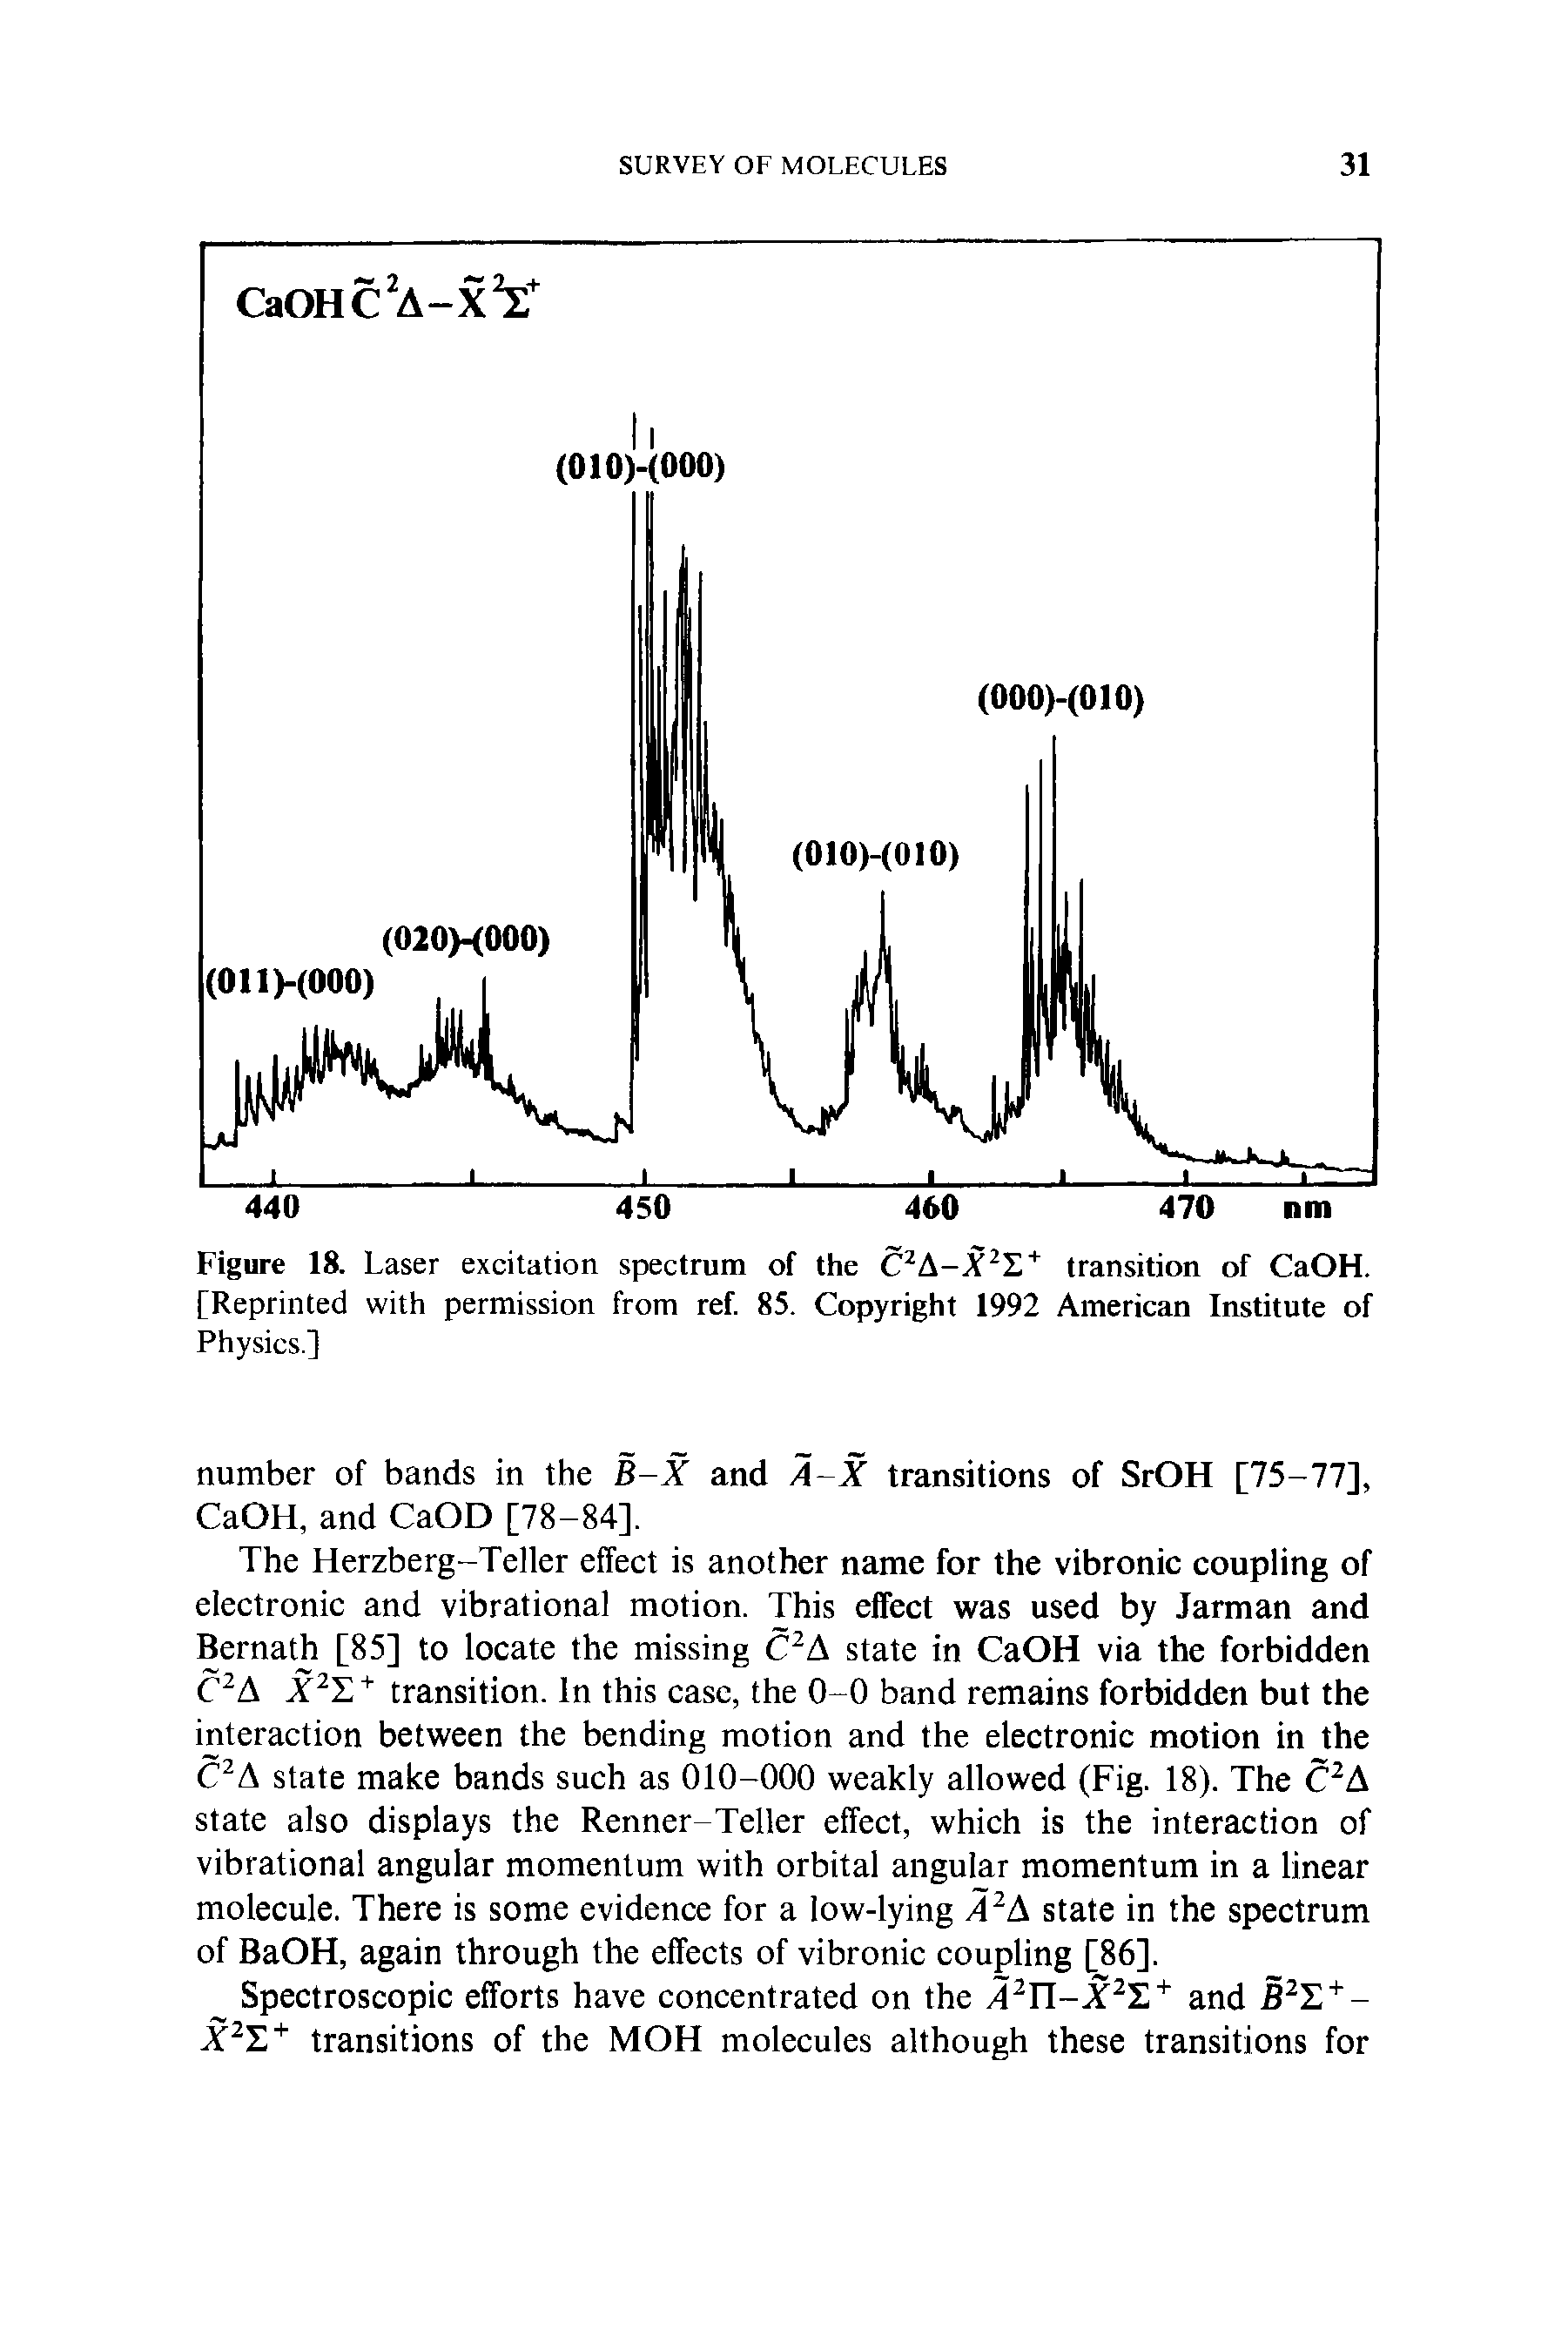 Figure 18. Laser excitation spectrum of the C2A-X21.+ transition of CaOH. [Reprinted with permission from ref. 85. Copyright 1992 American Institute of...